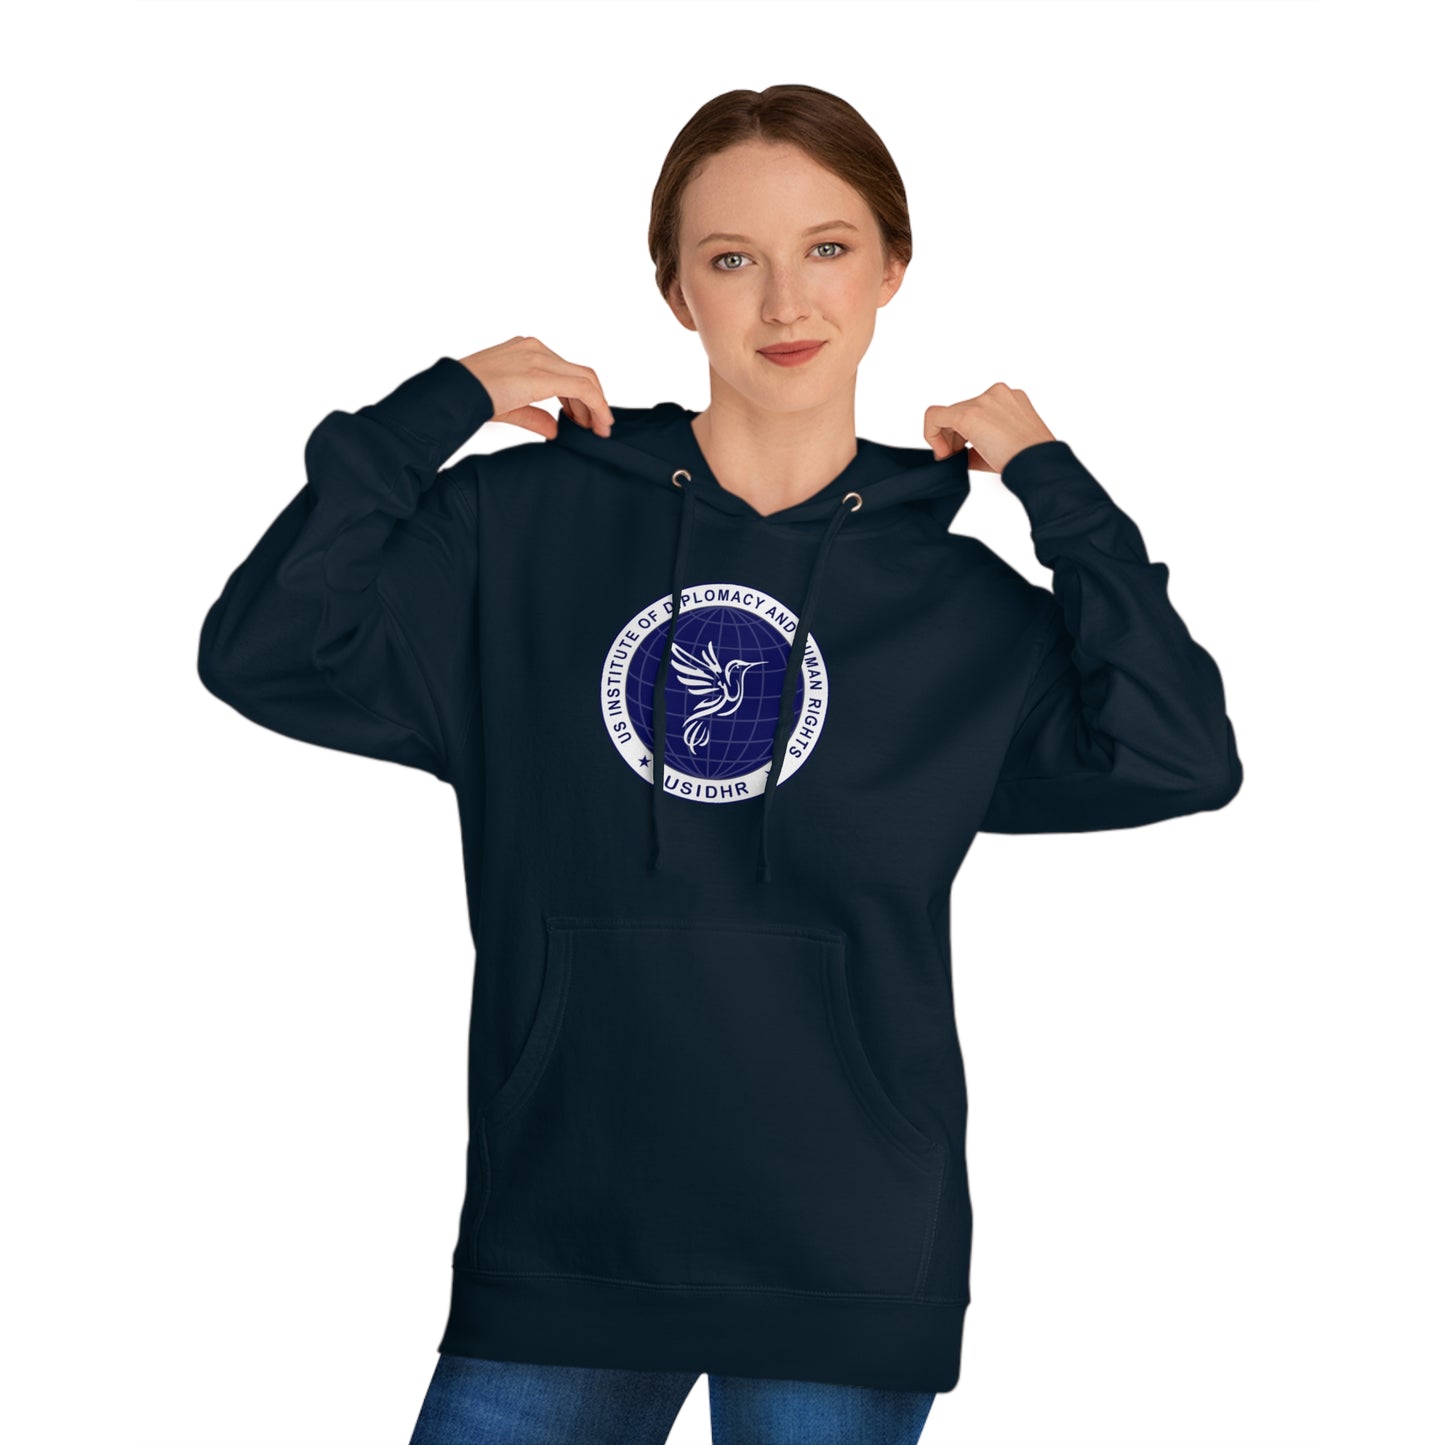 USIDHR Logo Hooded Cotton Sweatshirt for Relax time